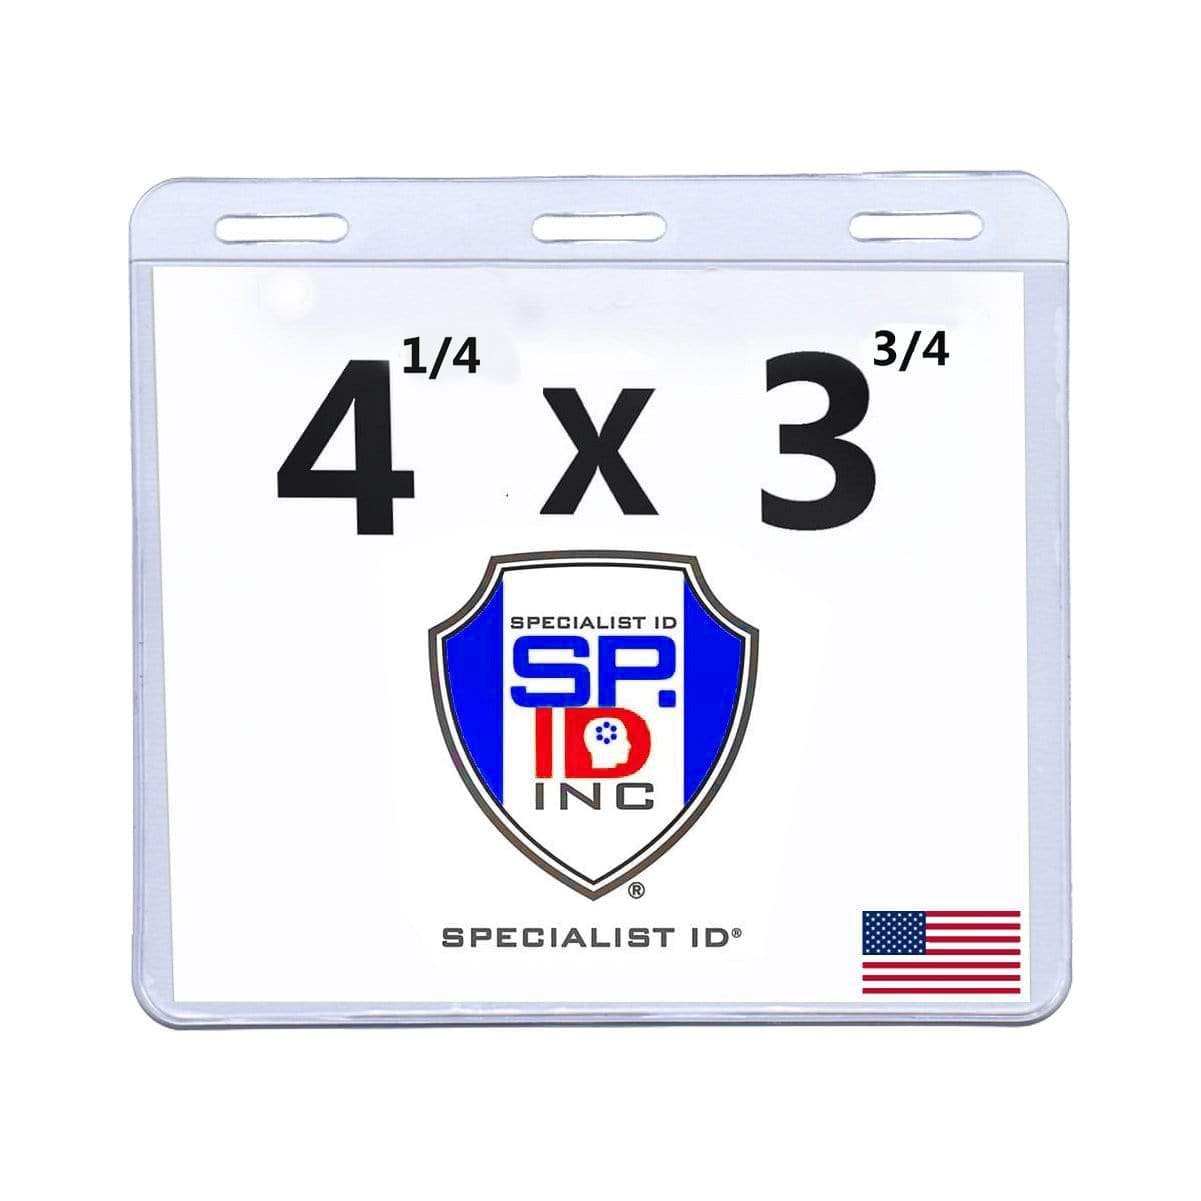 Large USA Made 4 ½ x 3 ¾ Vaccination Card Holders - Larger 4.5 x 3.75 Inch CDC Vaccination Card Sleeve with Wider Insert (SPID-1610) SPID-1610